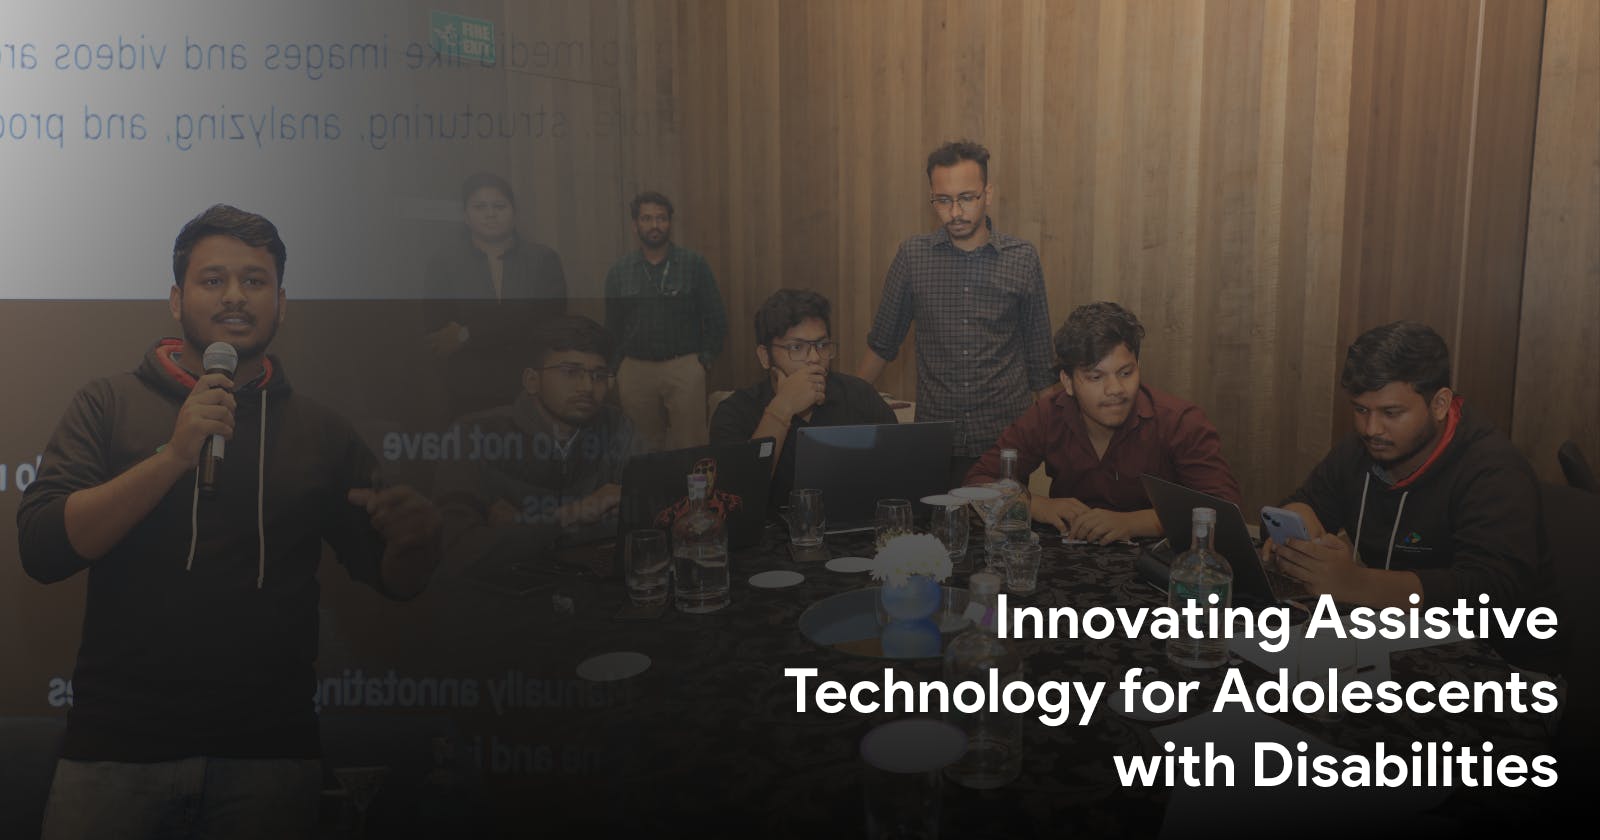 Hackathon on Innovating Assistive Technology for Adolescents with Disabilities